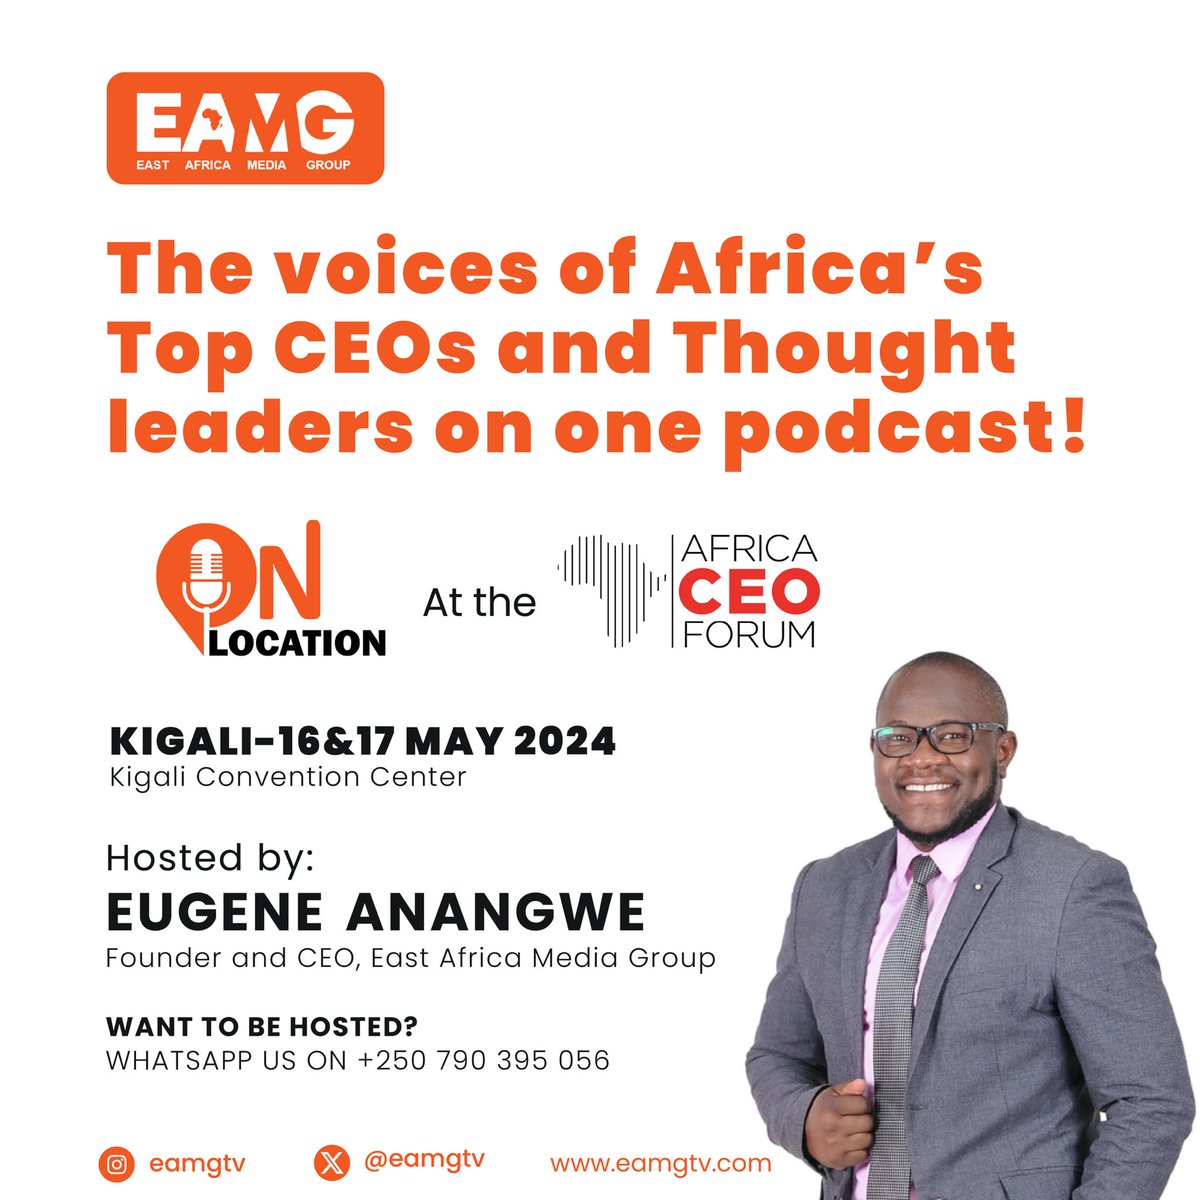 Alert! We can’t wait to hear from you! 

#OnLocation #AfricaCEOForum #EAMGtv eamgtv.com